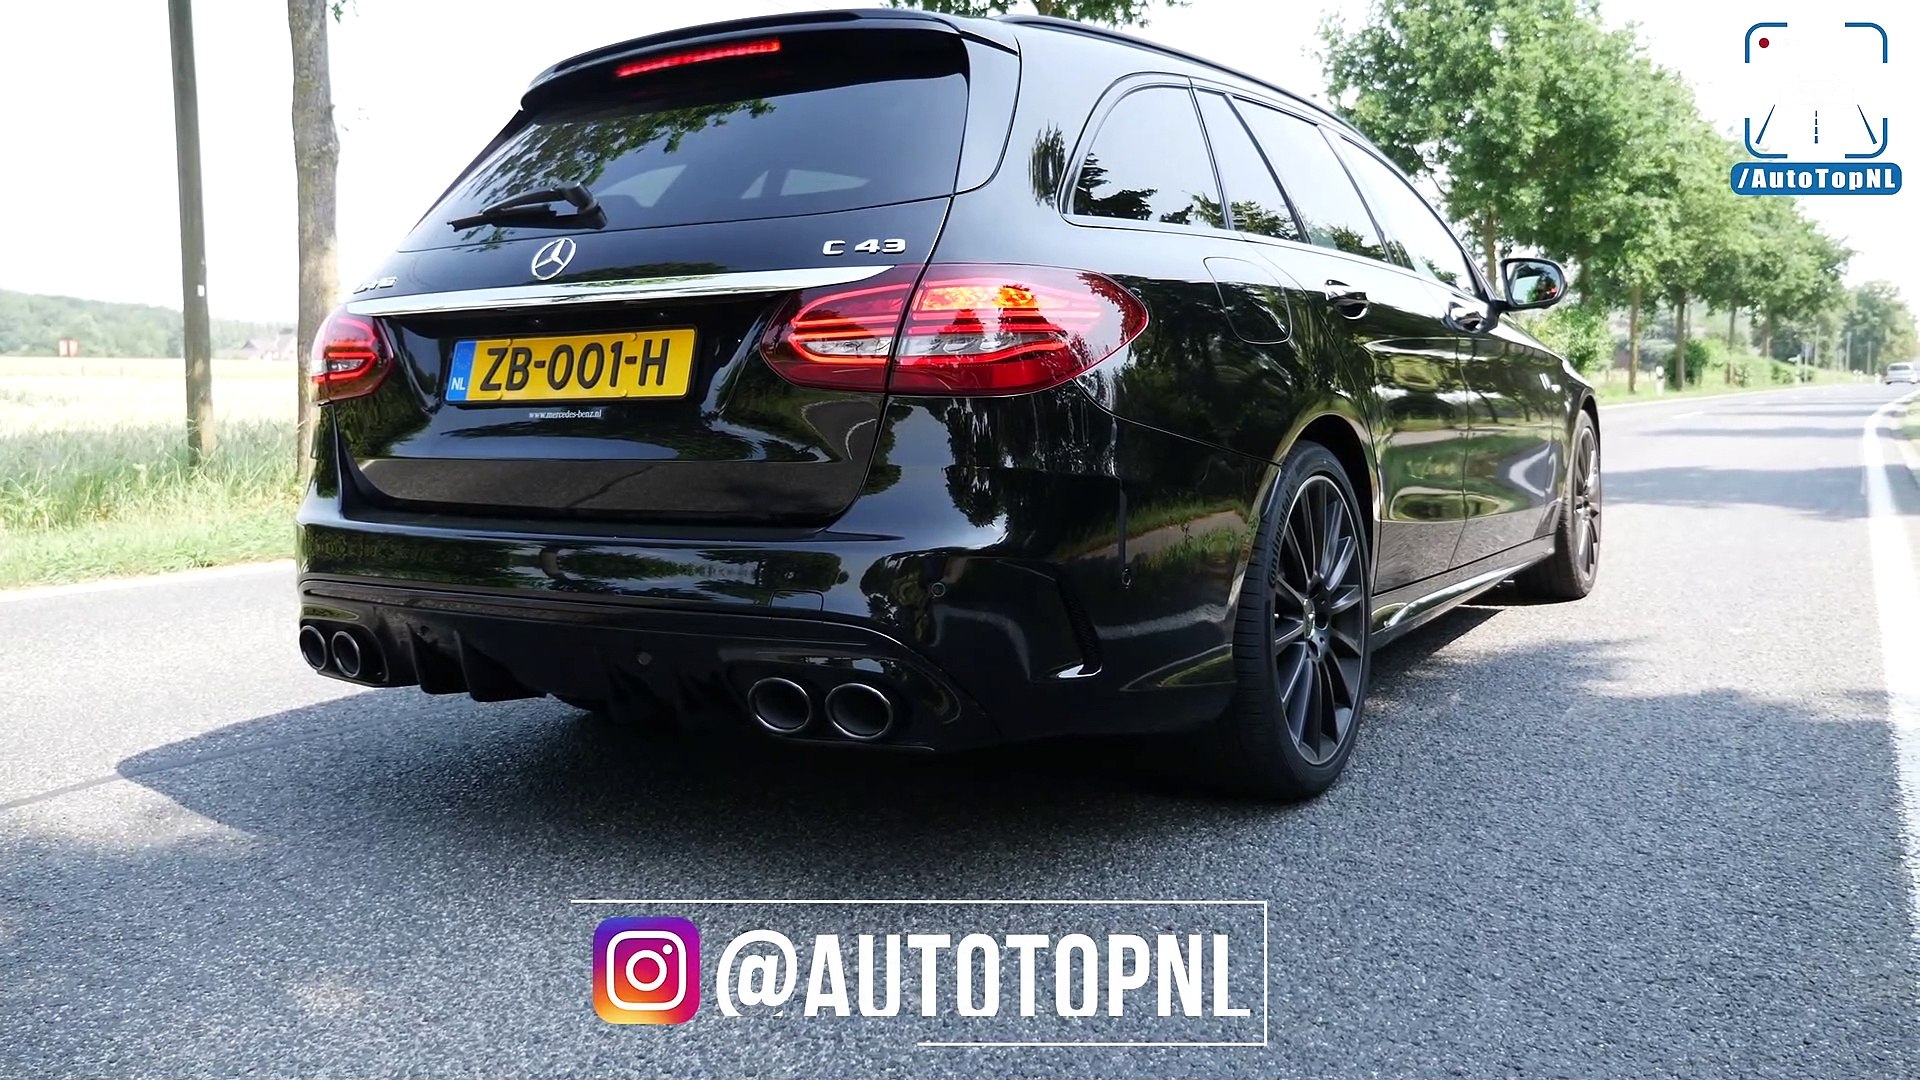 Mercedes-AMG C43 3.0 V6 BiTurbo PURE! Exhaust SOUND Revs & ONBOARD by AutoTopNL